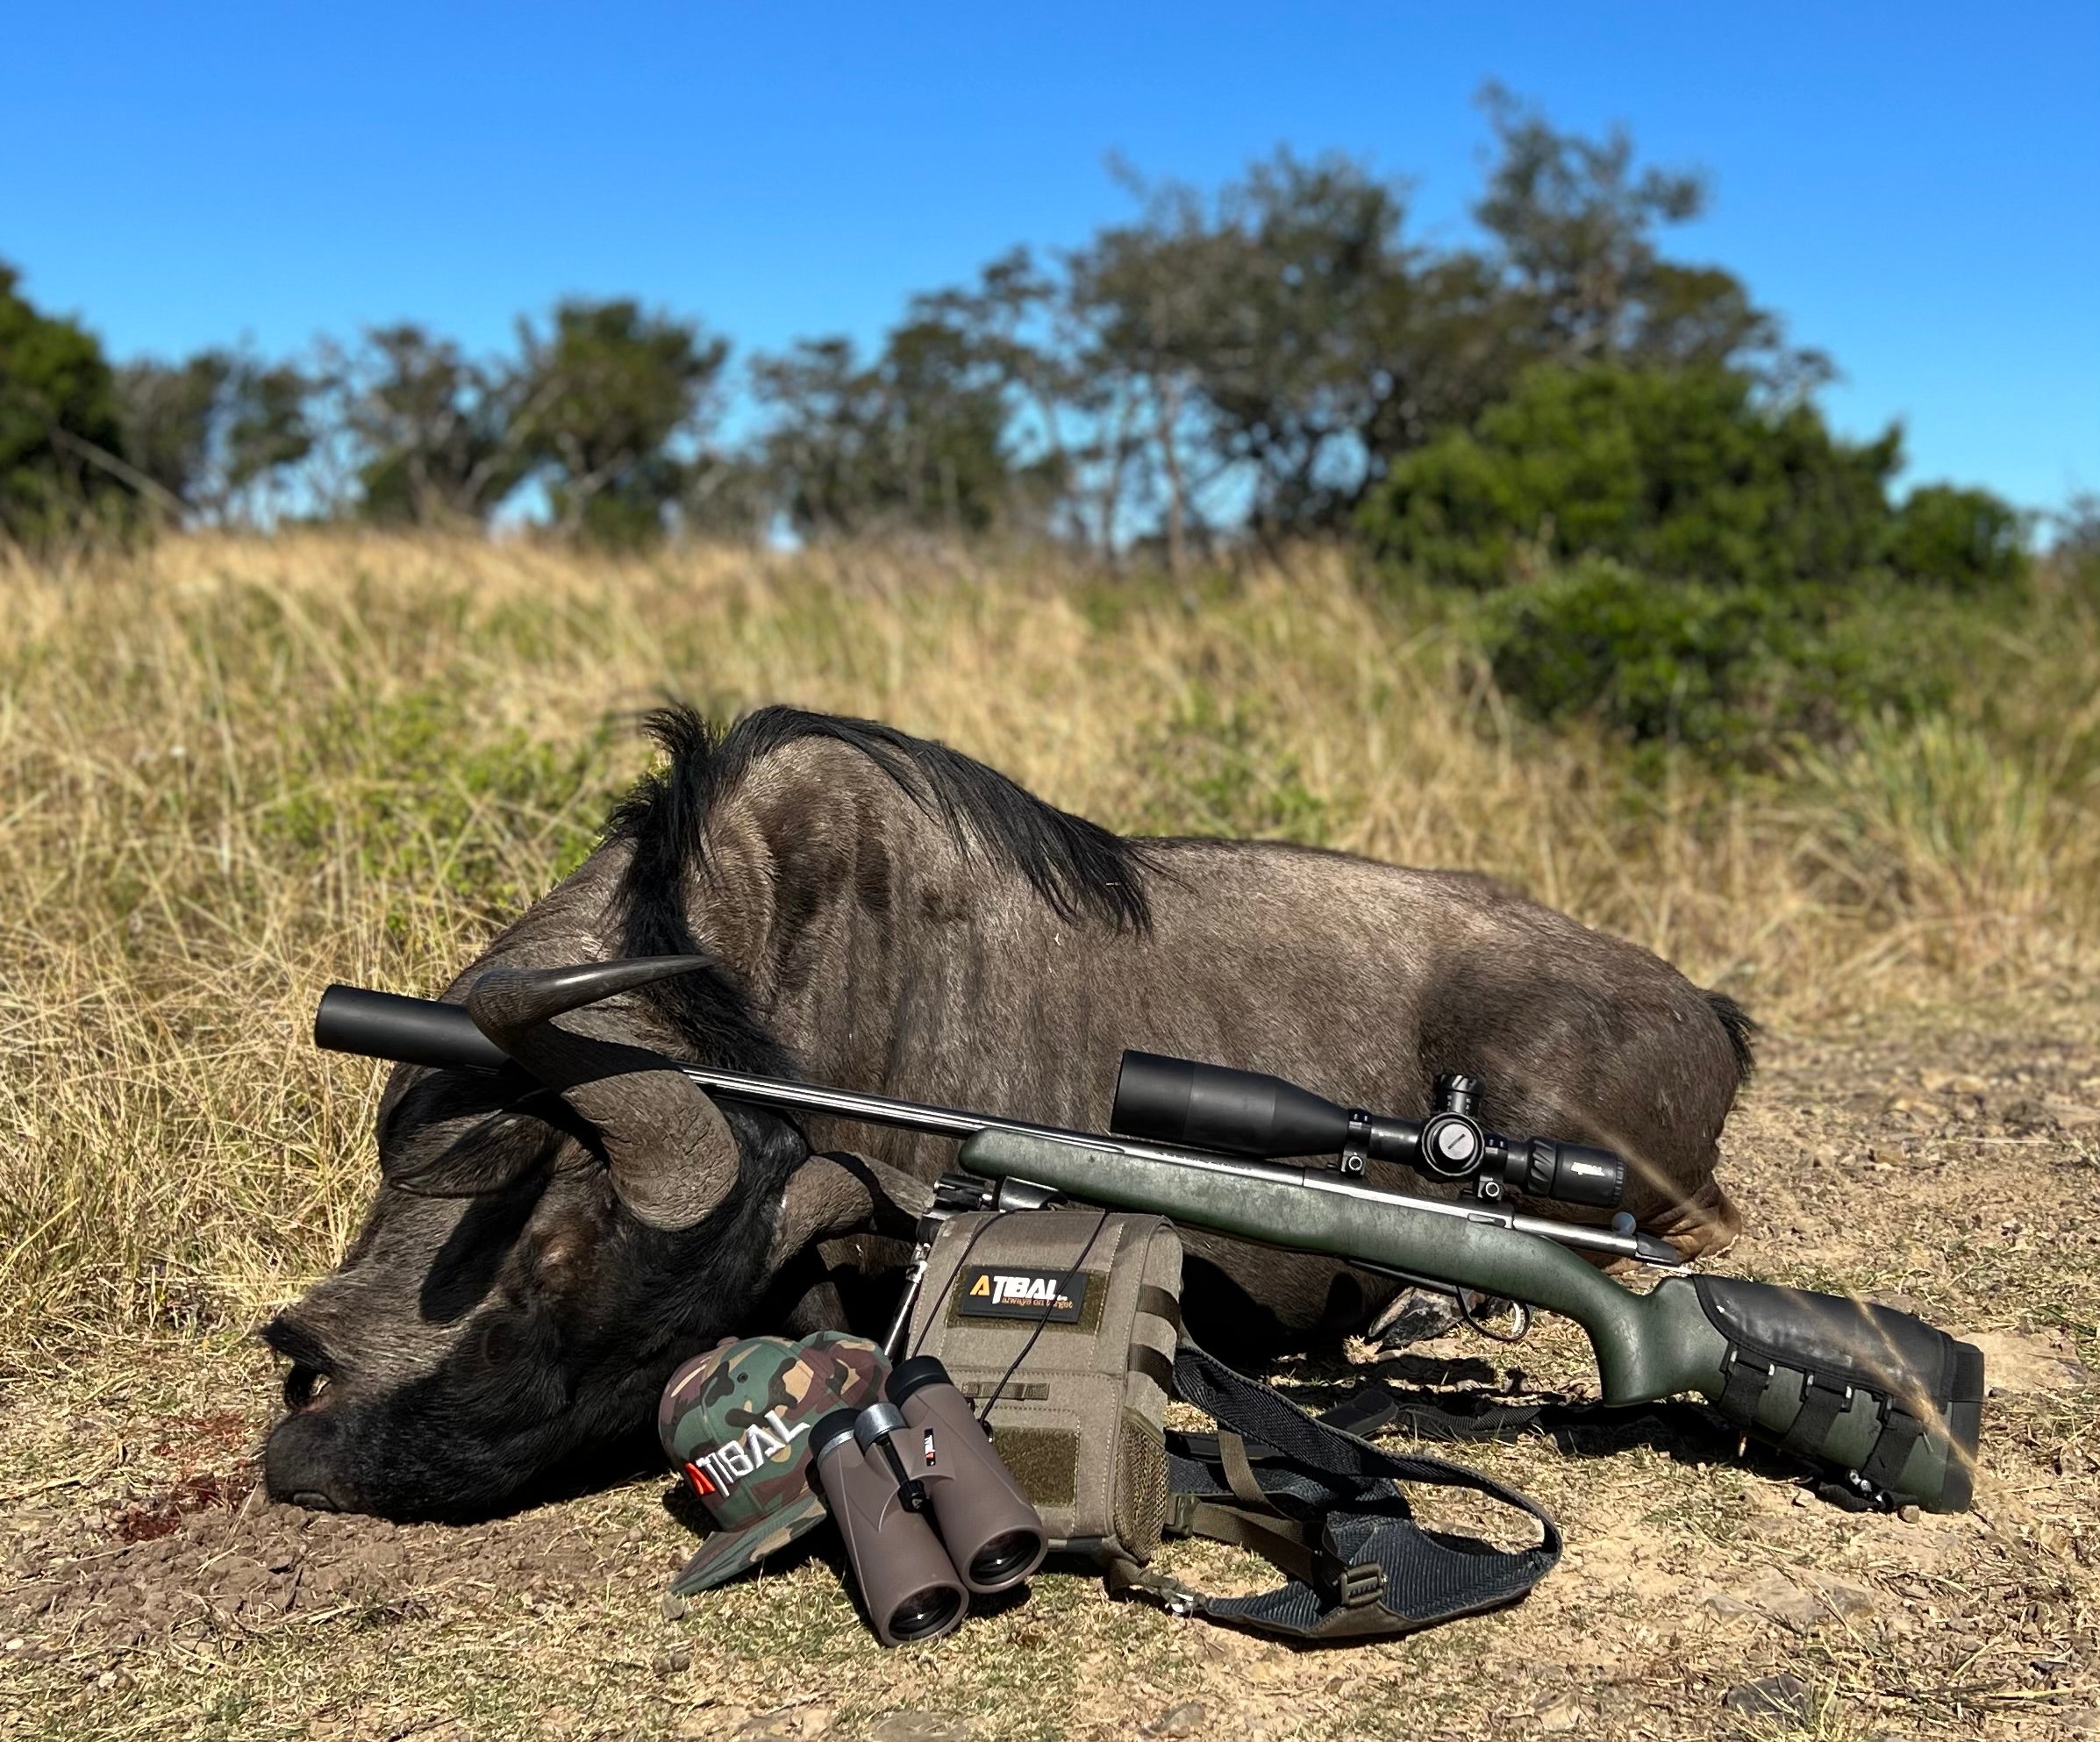 The Atibal Stealth 5-30x56 FFP tested in Africa